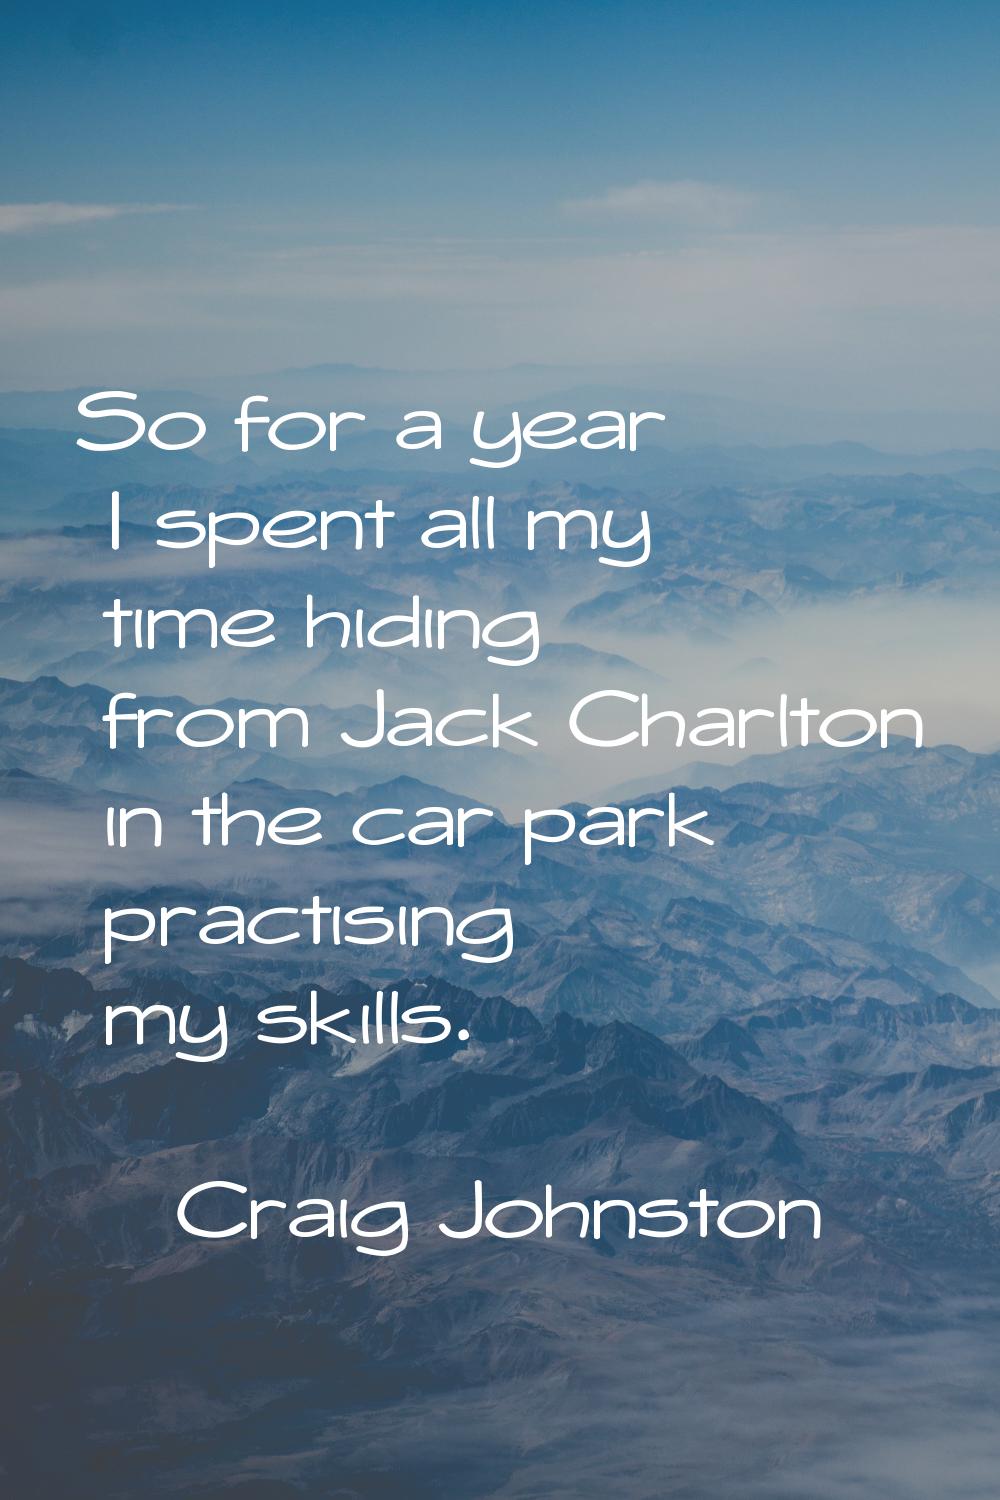 So for a year I spent all my time hiding from Jack Charlton in the car park practising my skills.